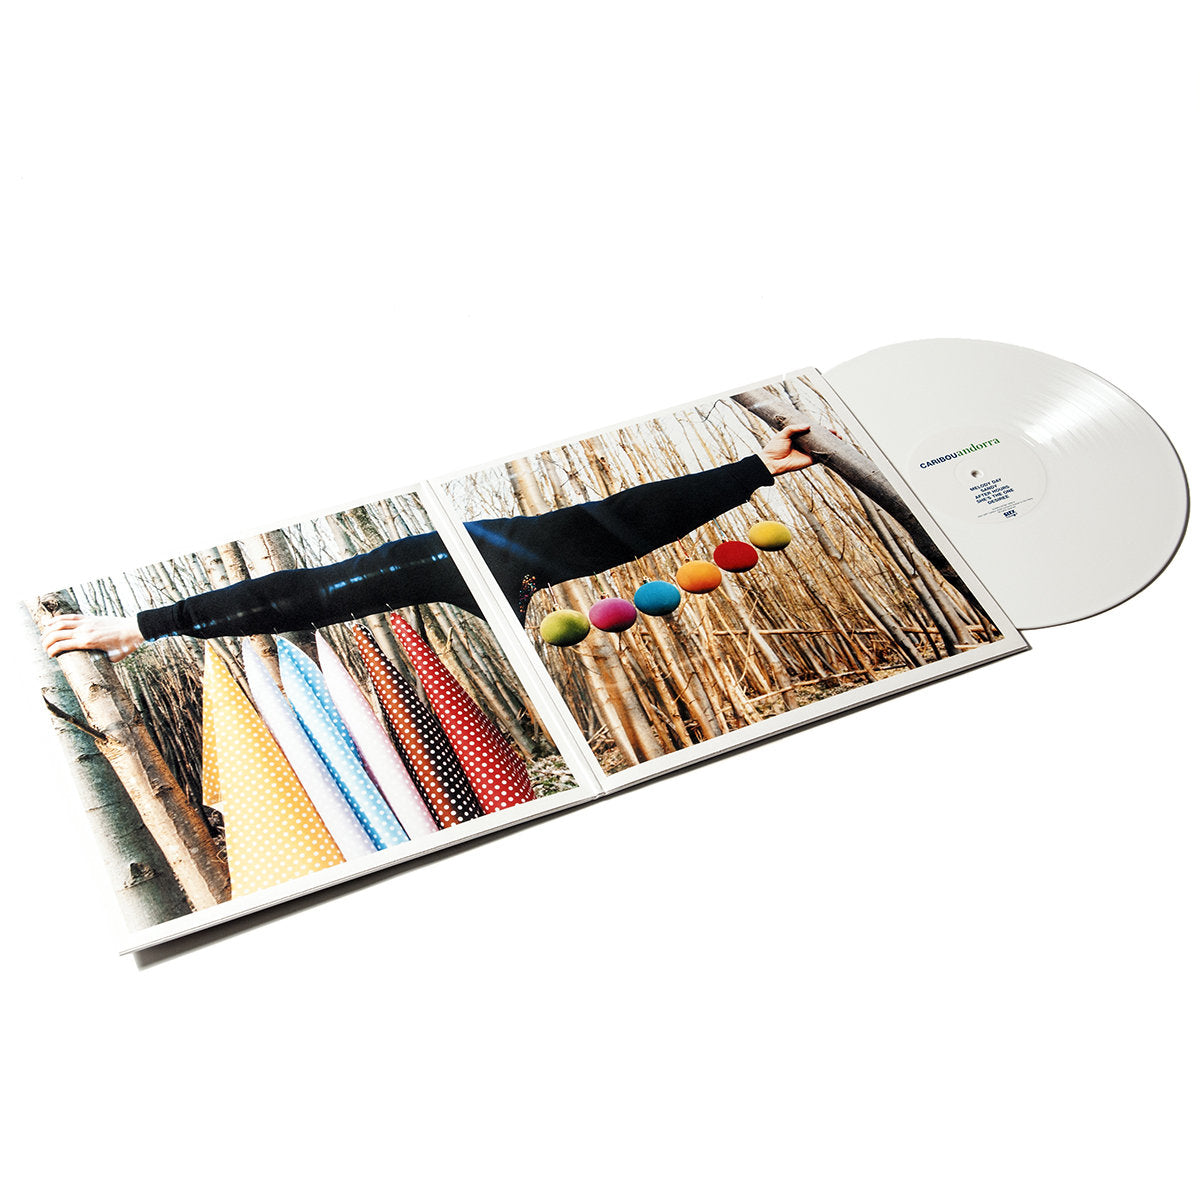 Caribou - Andorra "15th Anniversary Edition" (Limited Edition on 180g White Vinyl)